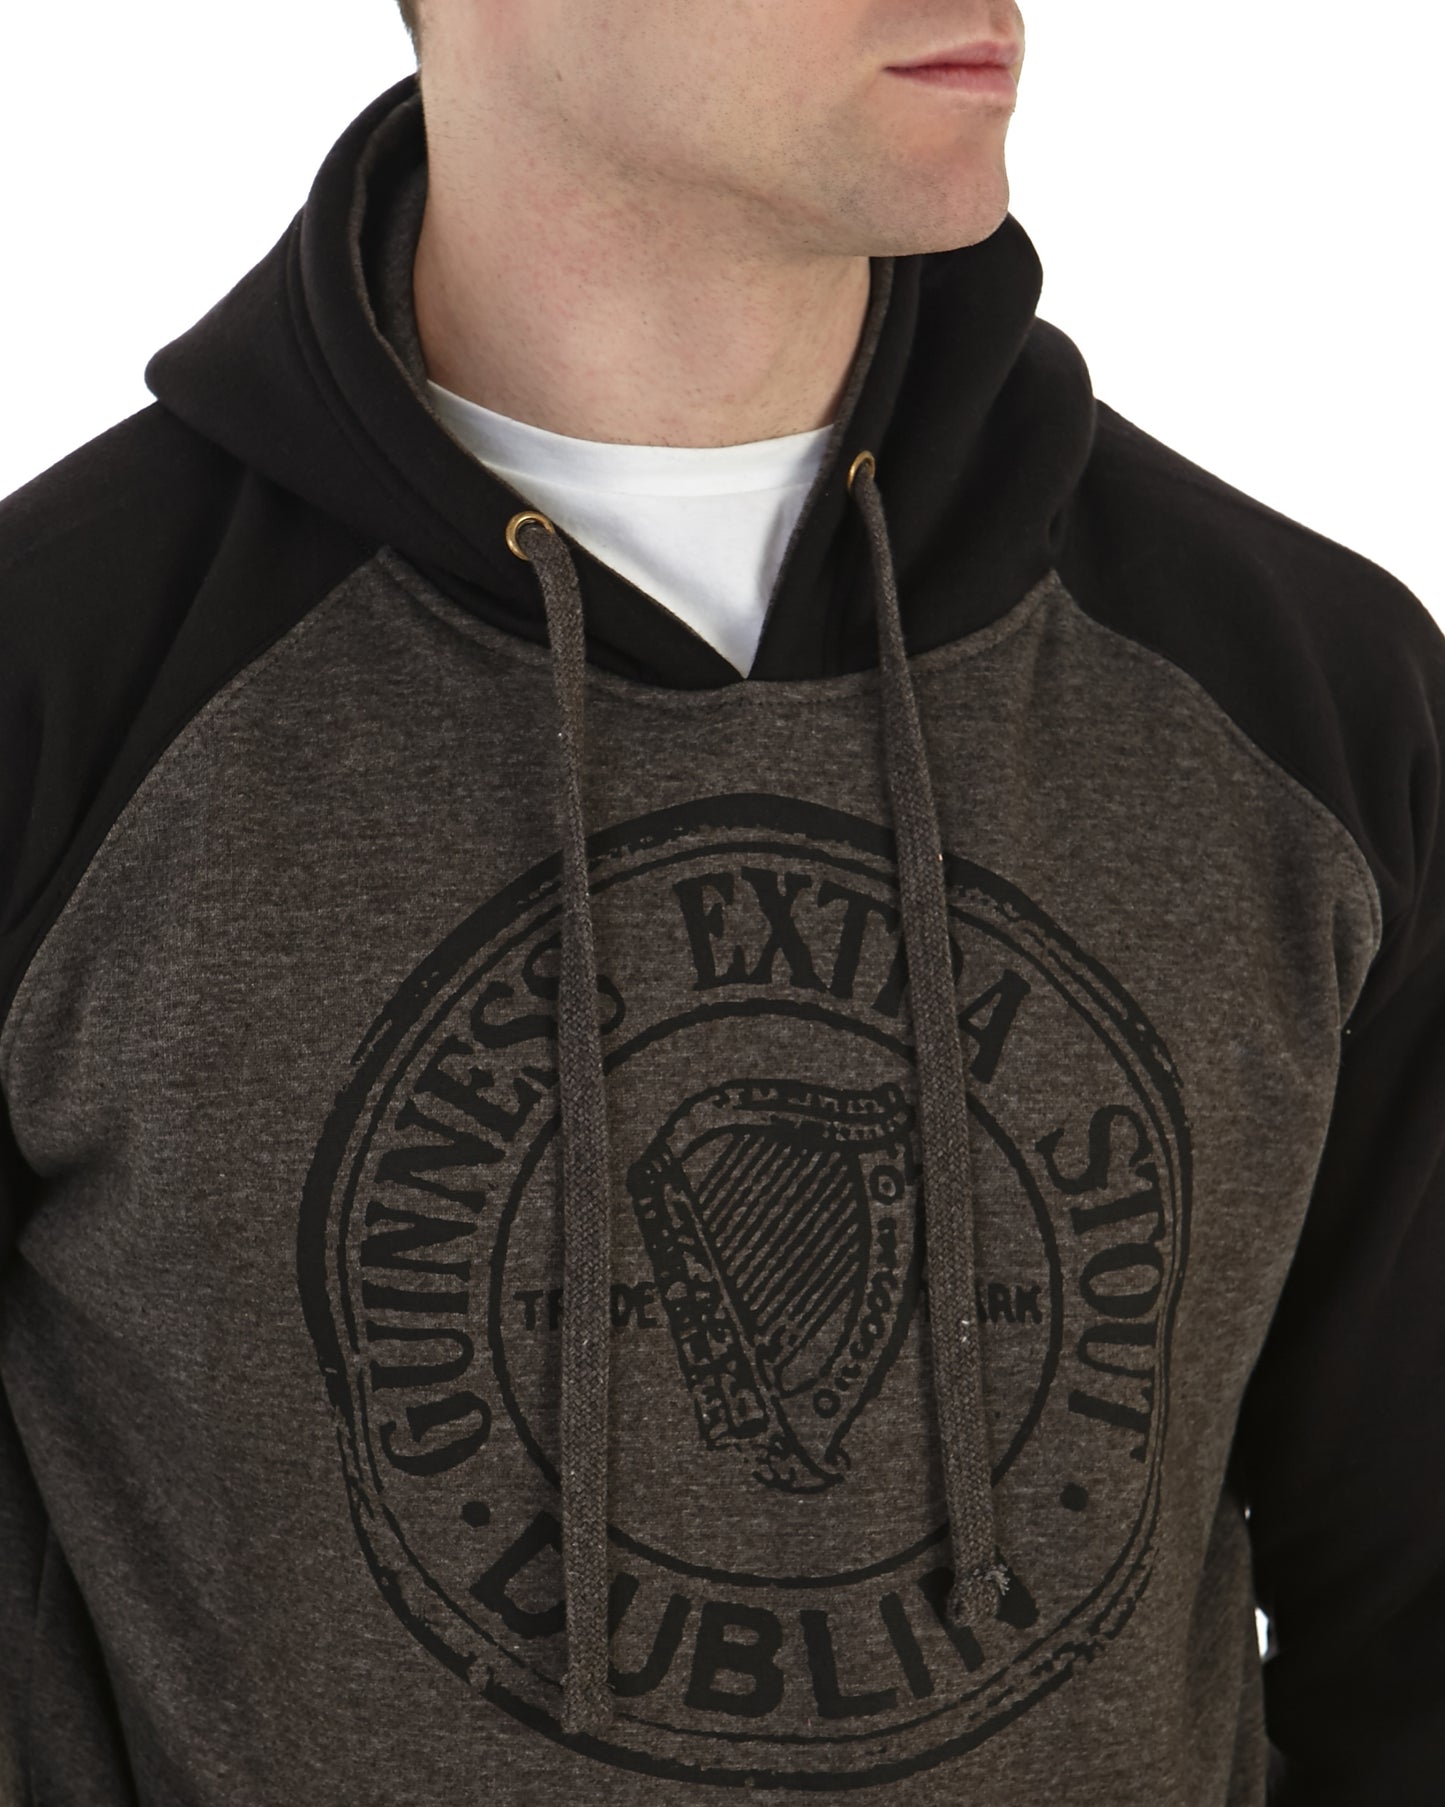 Guinness Extra Stout Charcoal Label Beer Bottle Hoodie with adjustable drawstring lined hood.